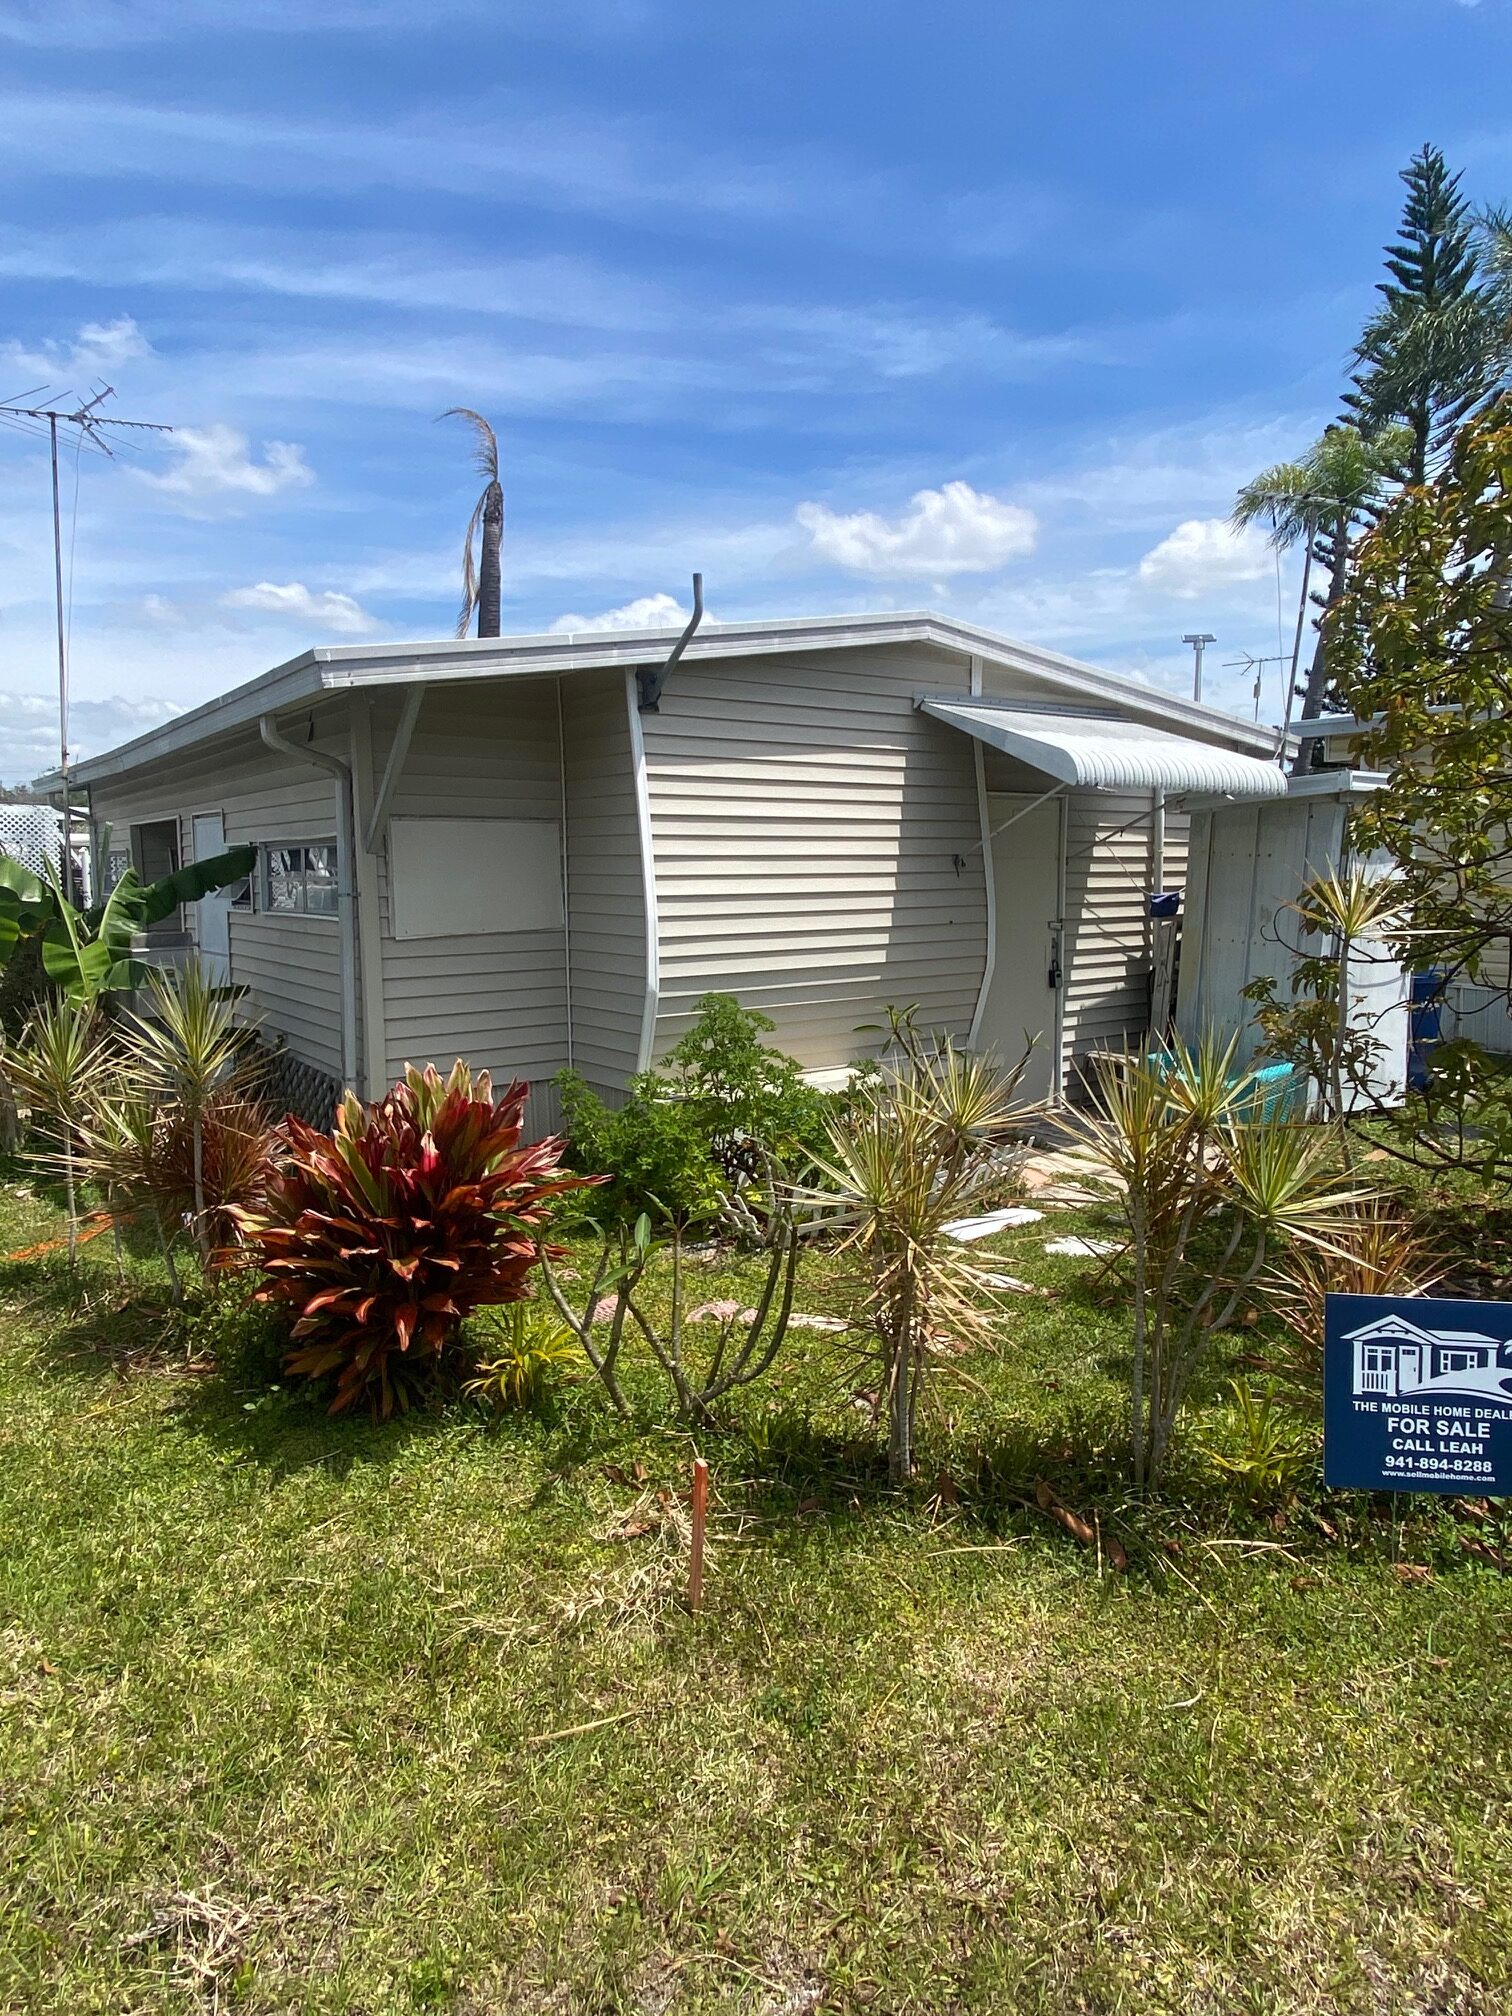 Can real estate agents sell mobile homes in Florida